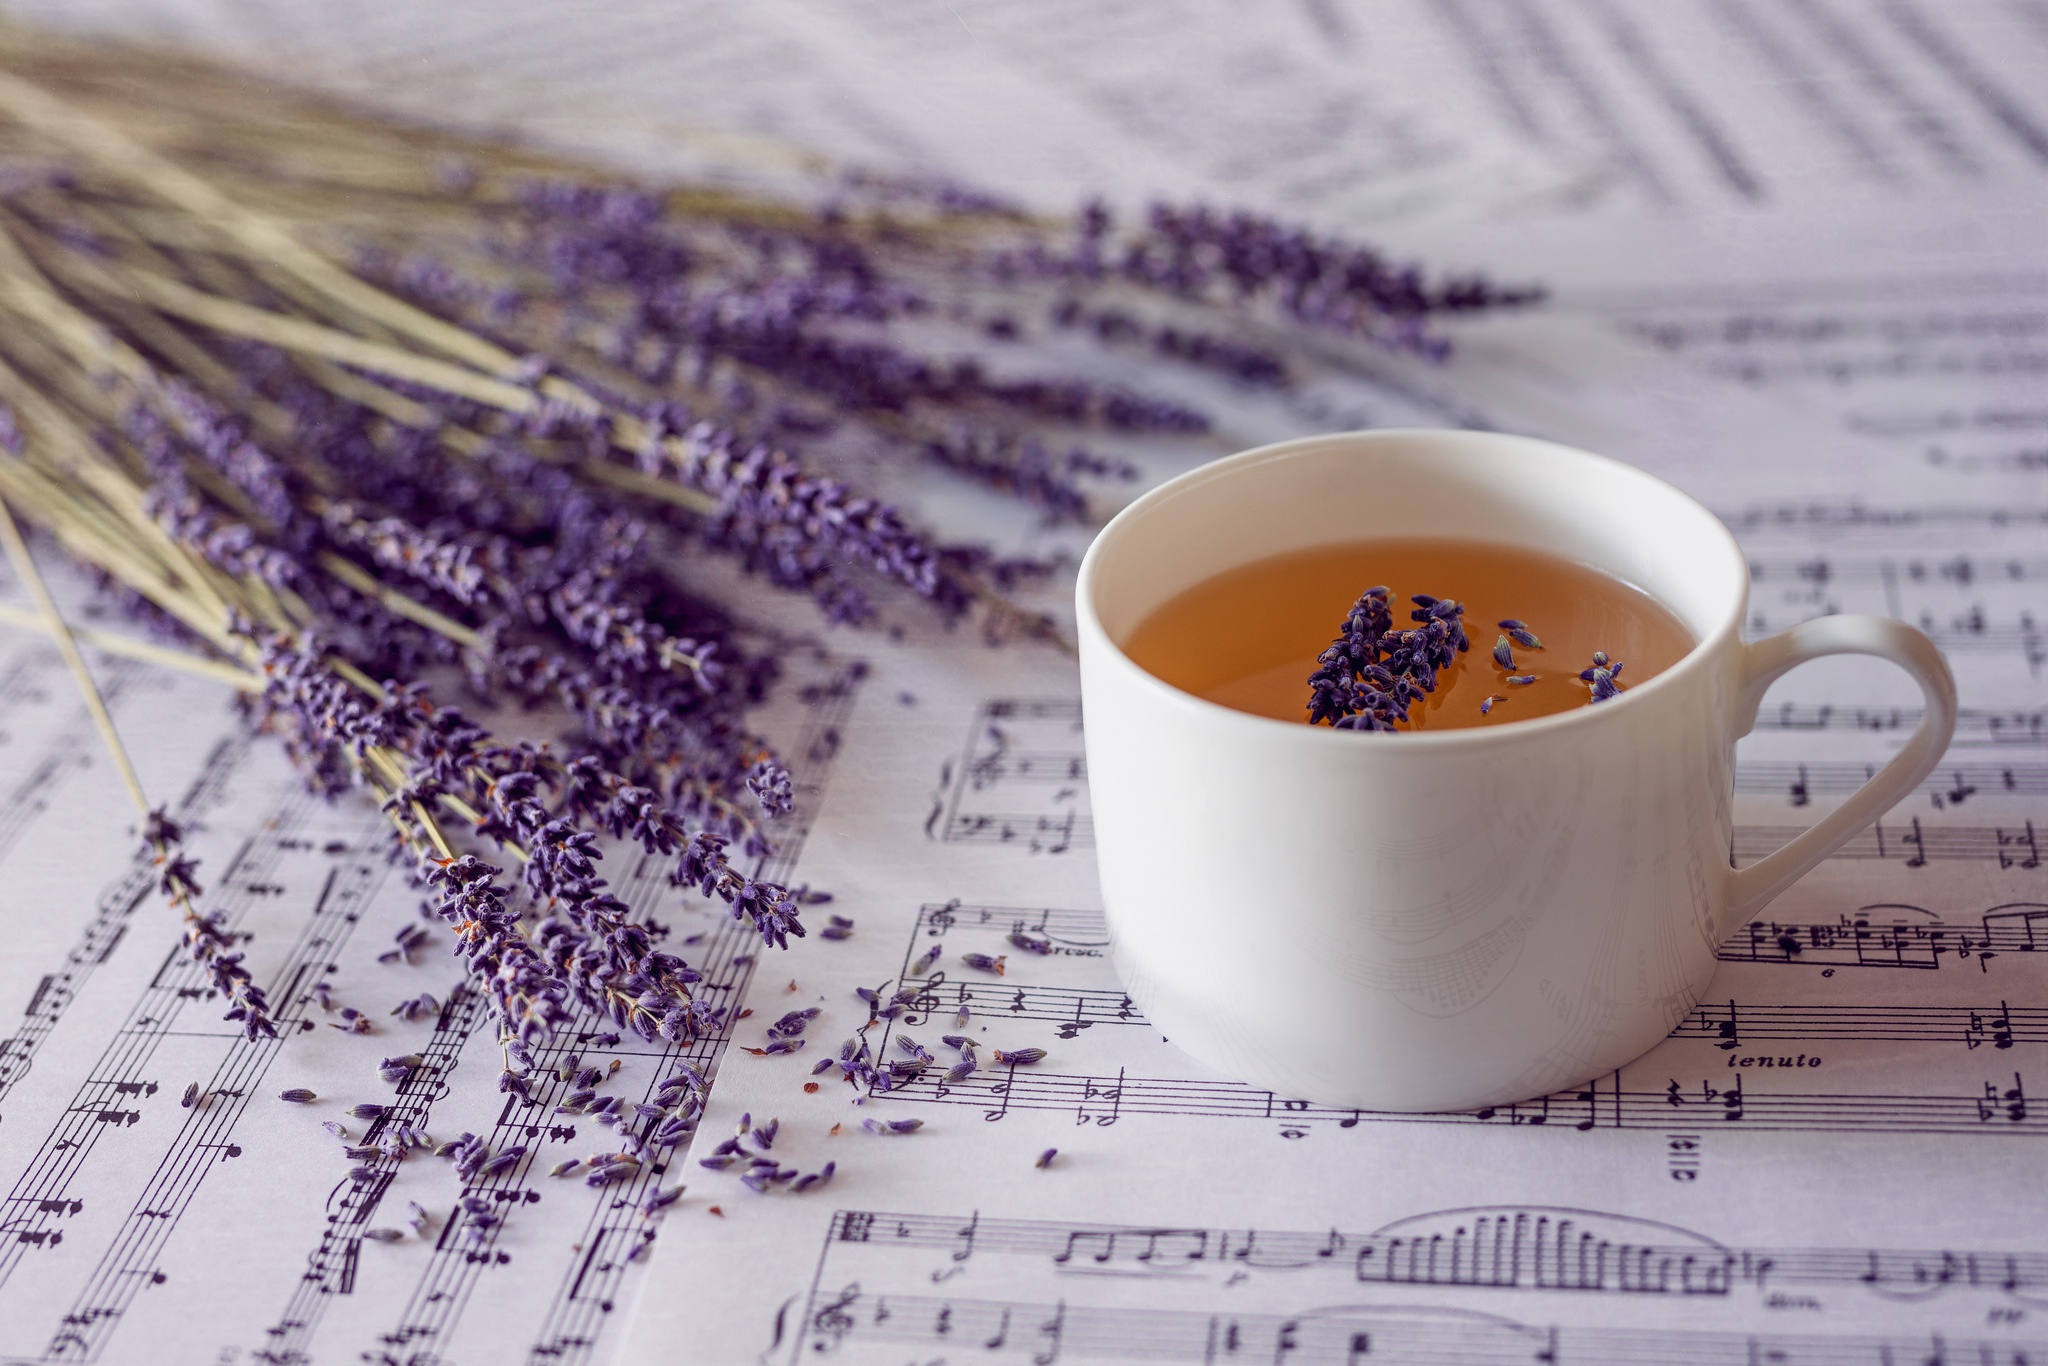 General 2048x1366 musical notes cup tea plants lavender closeup drink paper depth of field